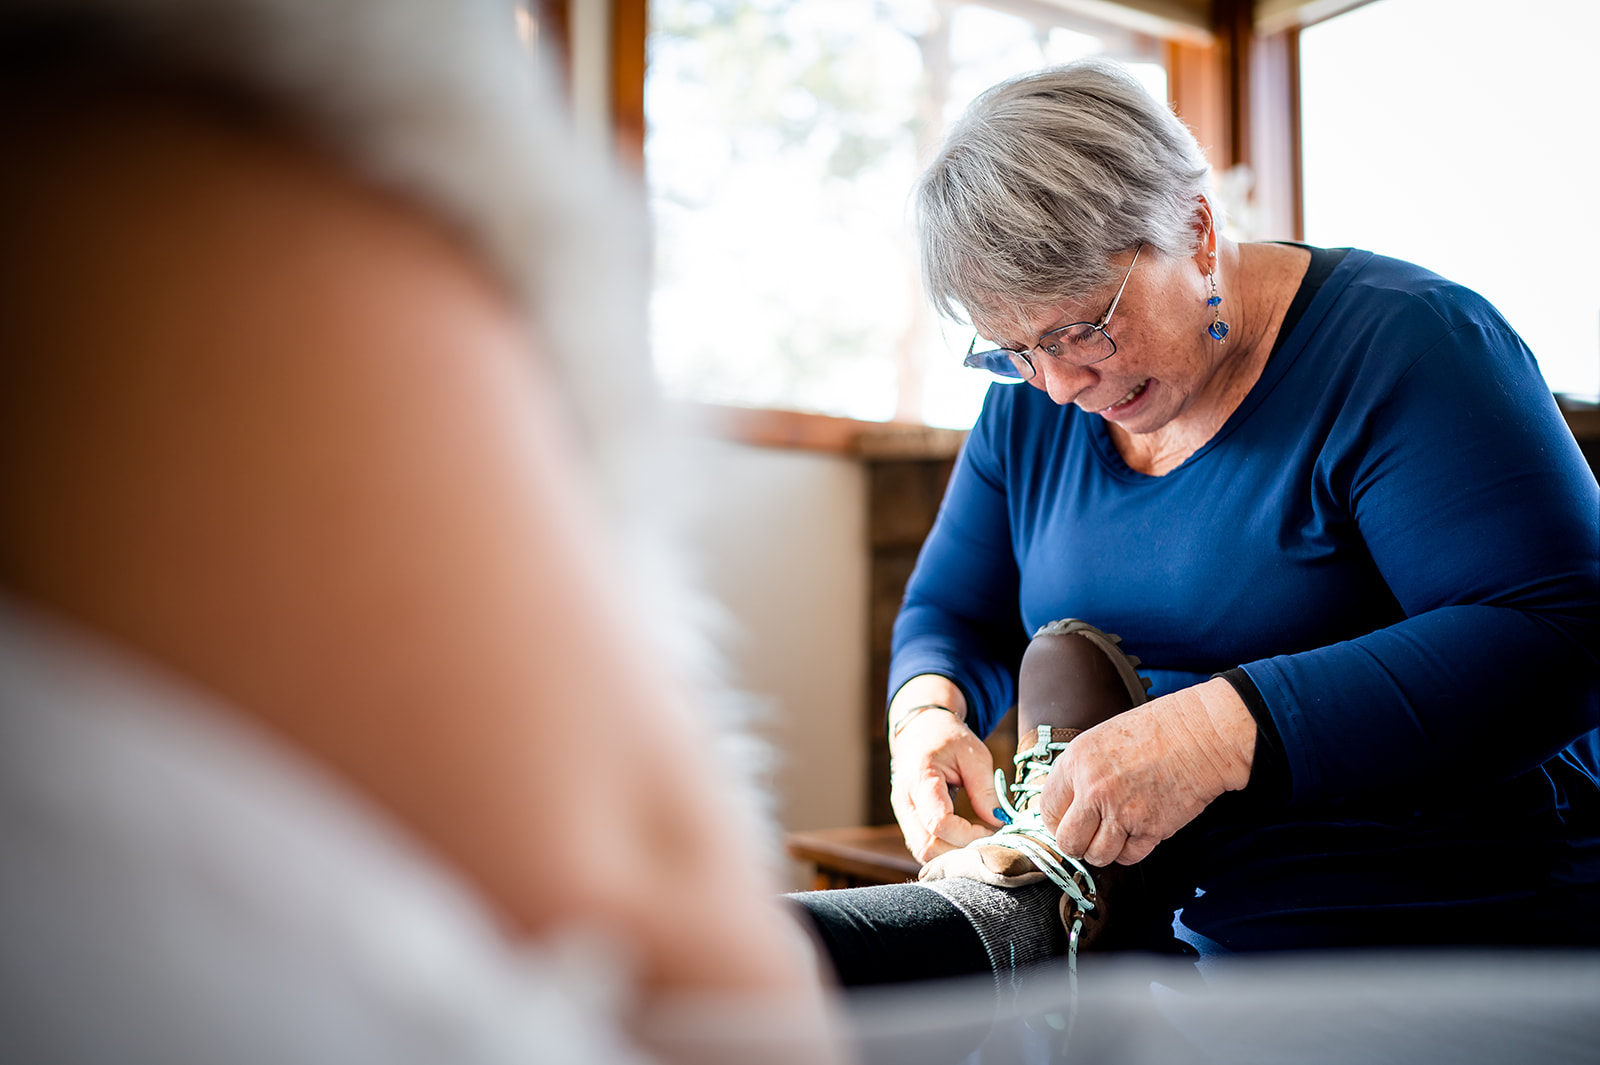 Mom helps to lace up her daughter's hiking boots that she is wearing on her elopement day in Colorado